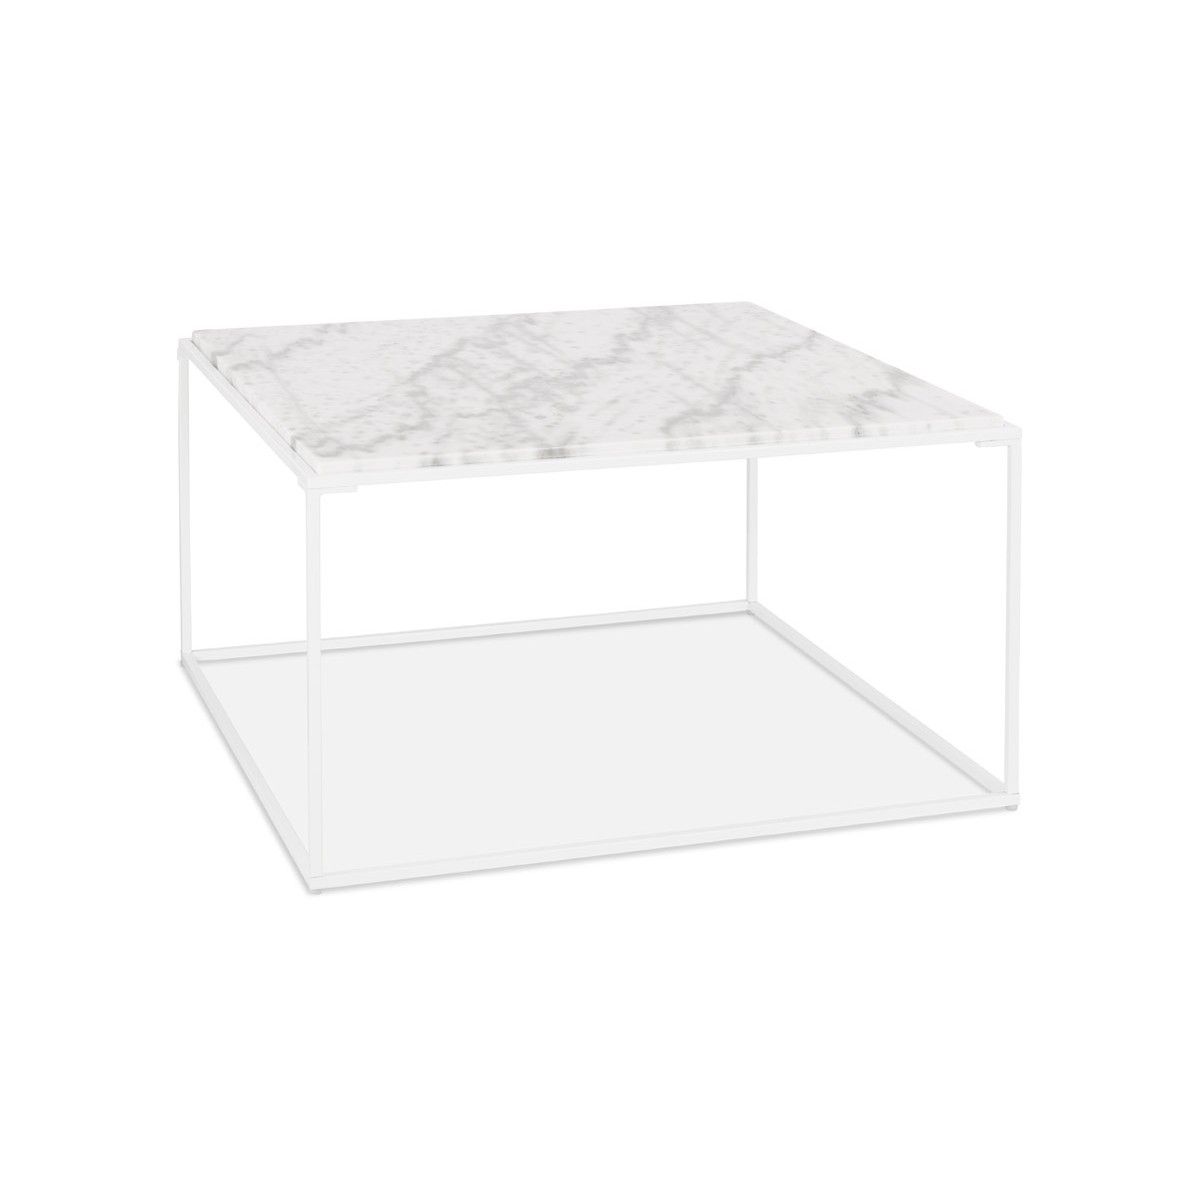 Robyn Marbled Stone Design Coffee Table (white) – Amp Story 6966 Regarding Deco Stone Coffee Tables (View 6 of 15)